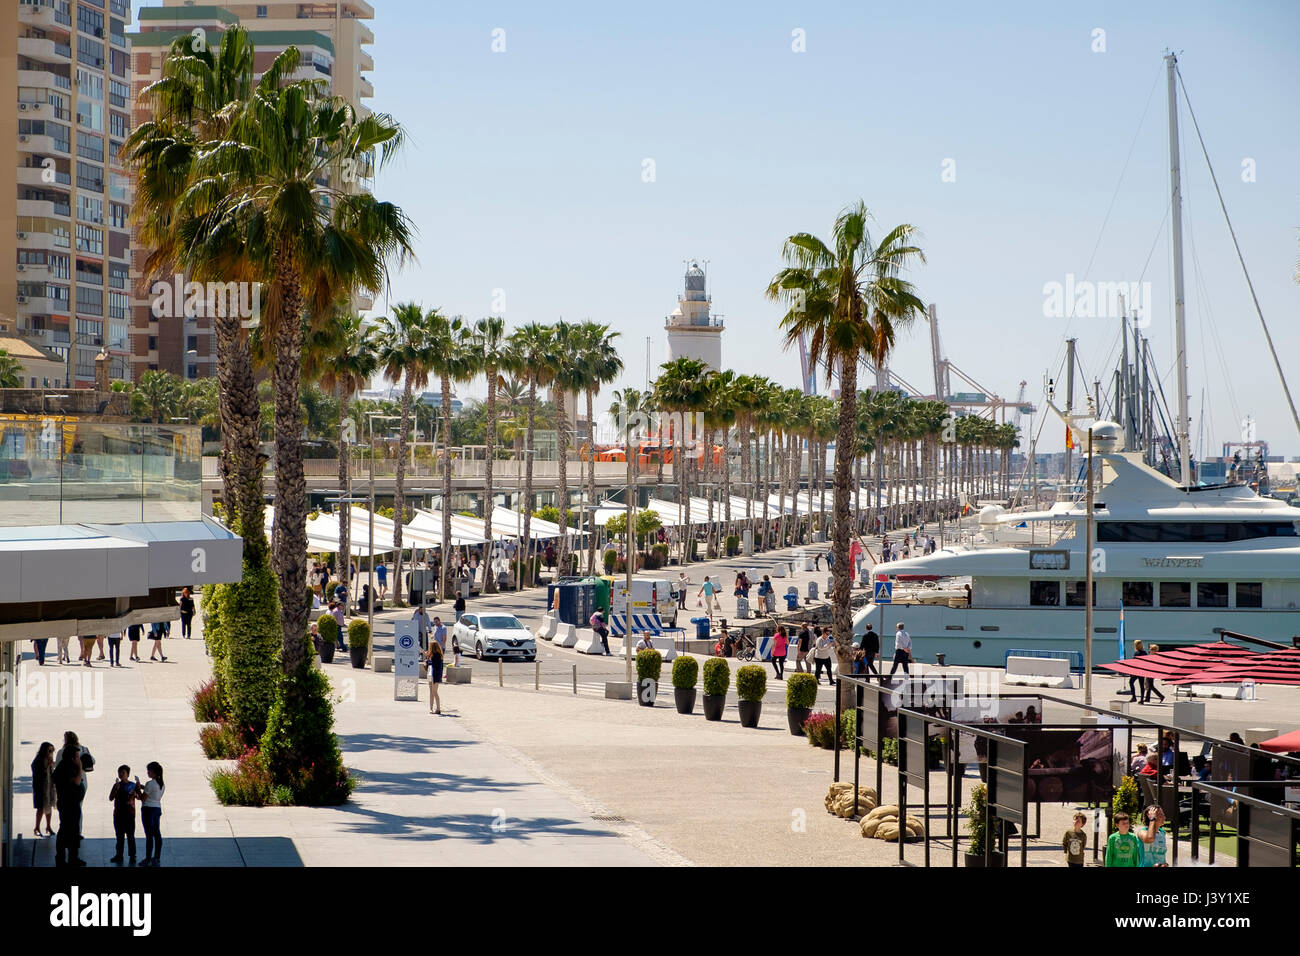 Paseo del Muelle Uno - a quayside shopping and arts area in Malaga Stock Photo